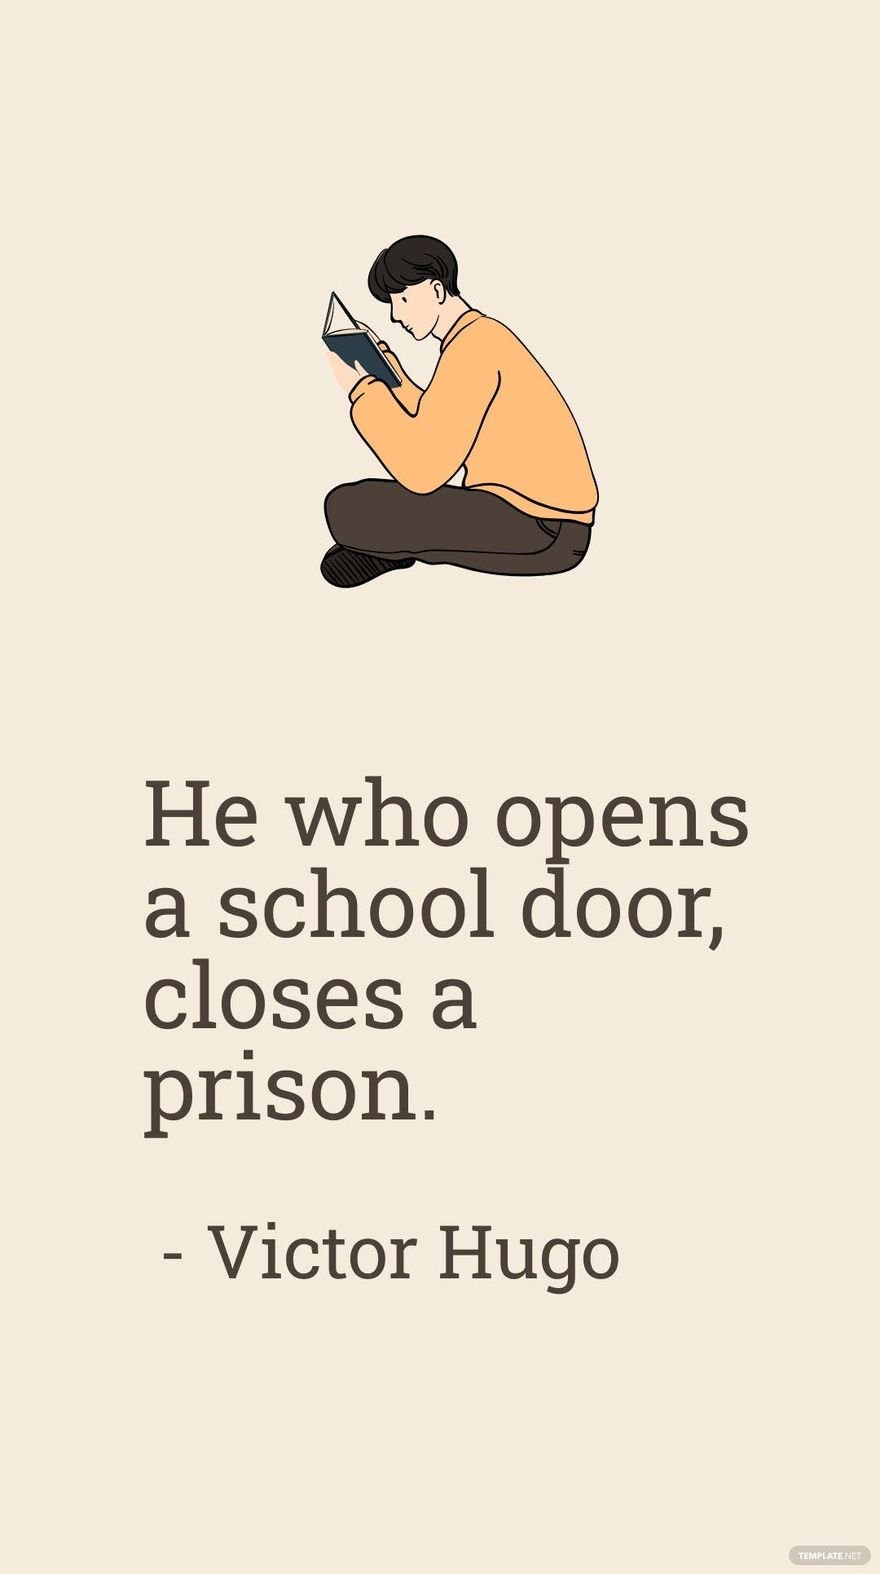 Free Victor Hugo - He who opens a school door, closes a prison. in JPG